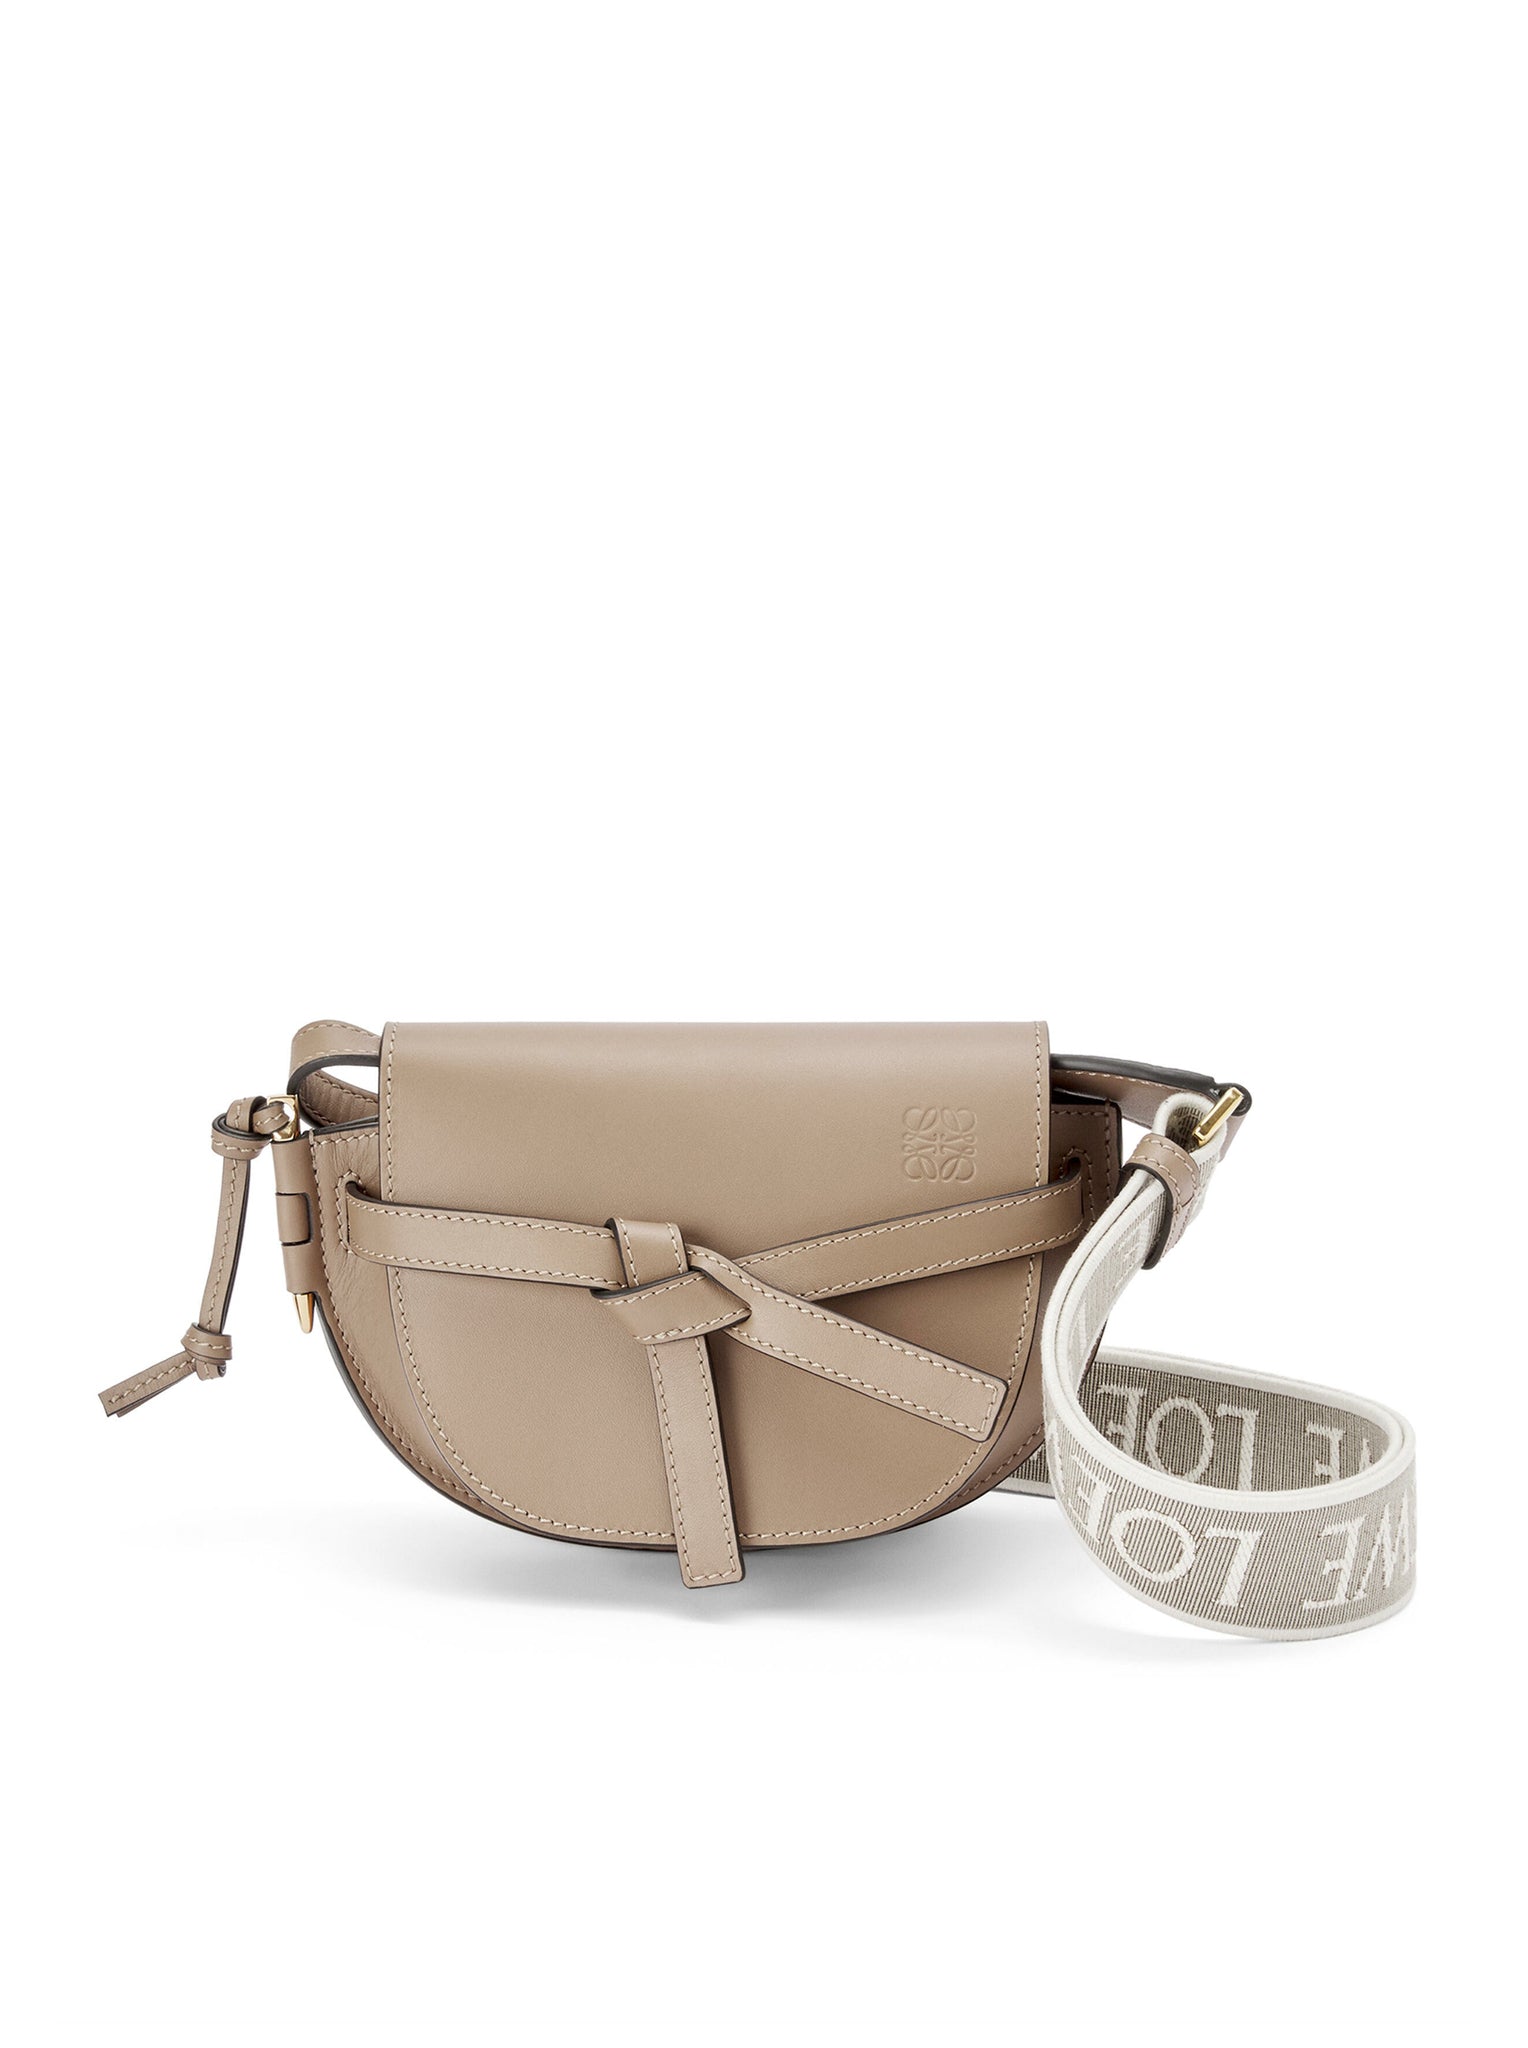 The Elegant and Versatile Appeal of the Loewe Gate Bag – LuxUness